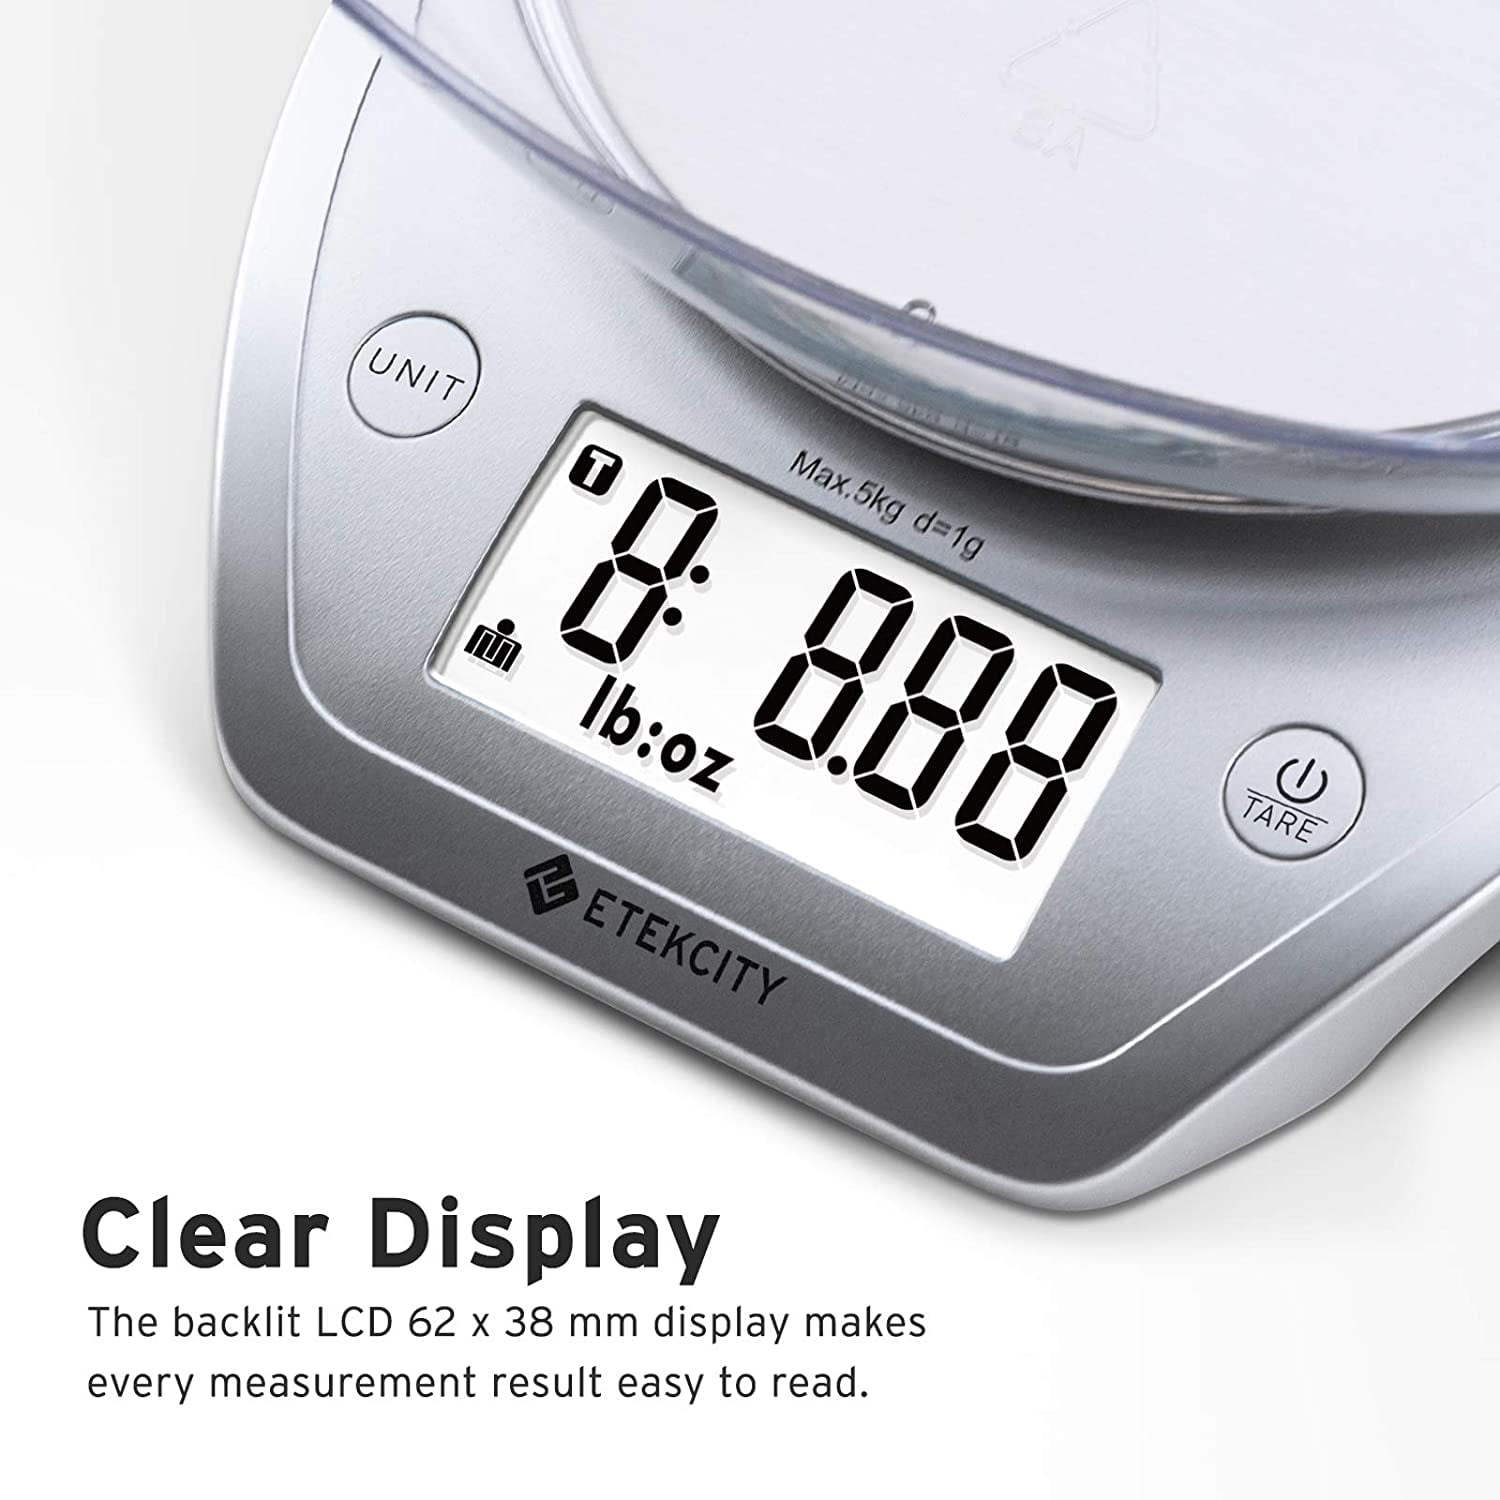 Etekcity Digital Kitchen Scale Multifunction Food Scale with Removable Bowl